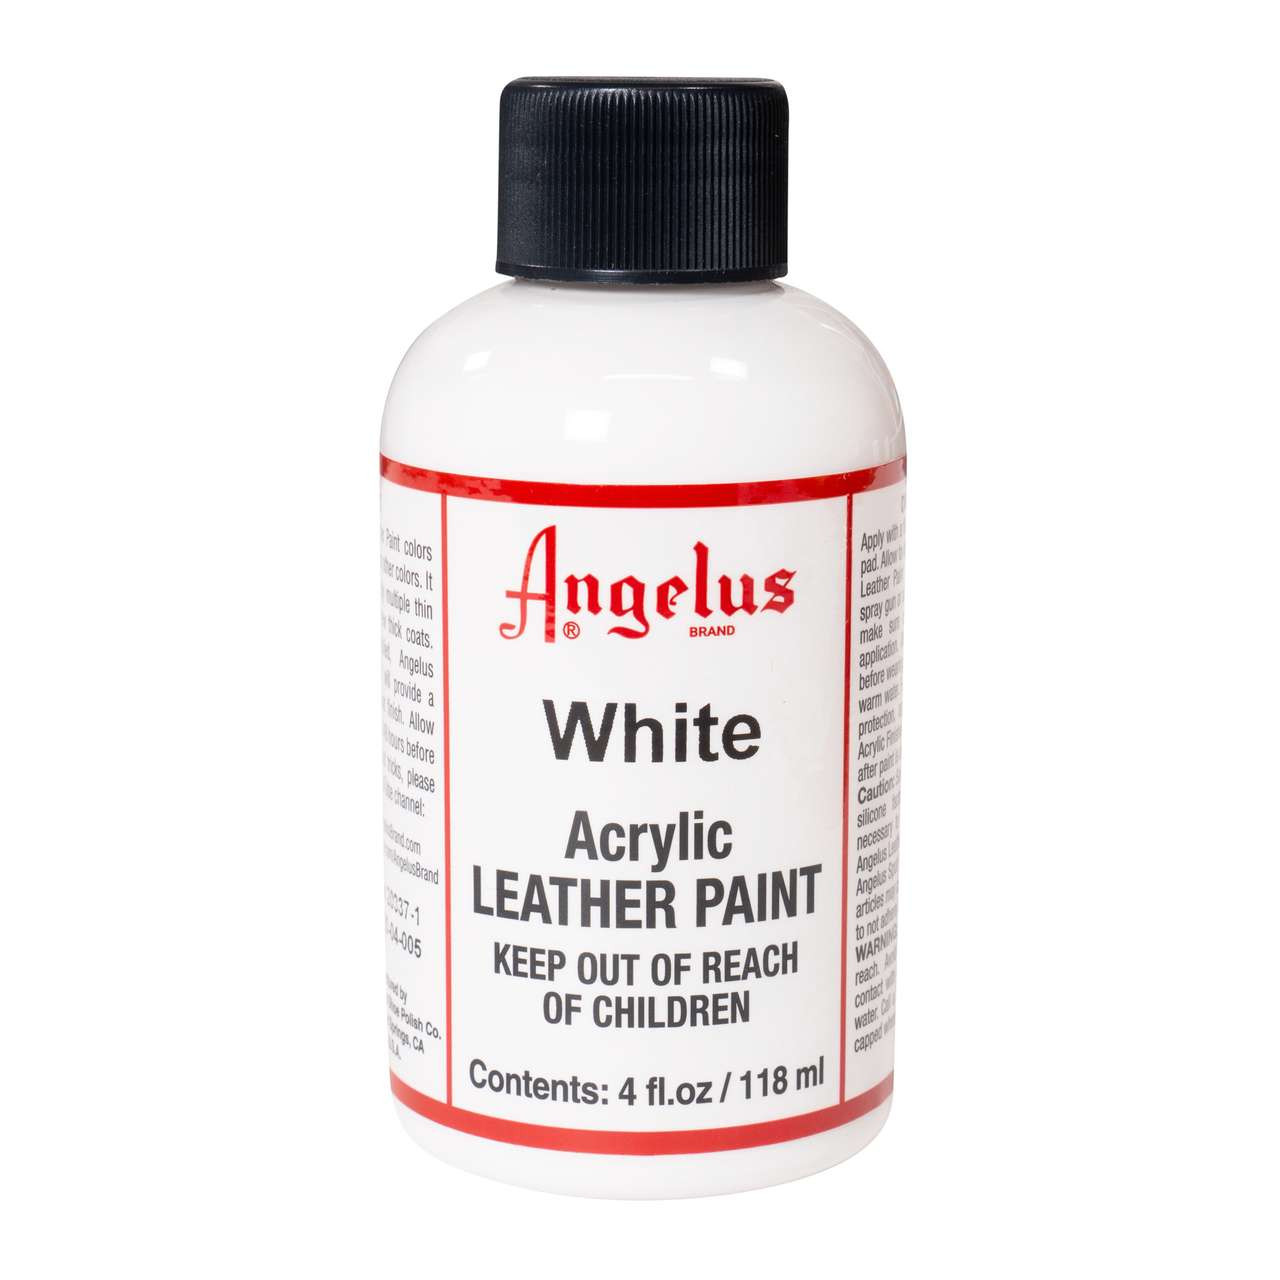  Customer reviews: Angelus Brand Acrylic Leather Paint Matte  Finisher No. 620 - 4oz